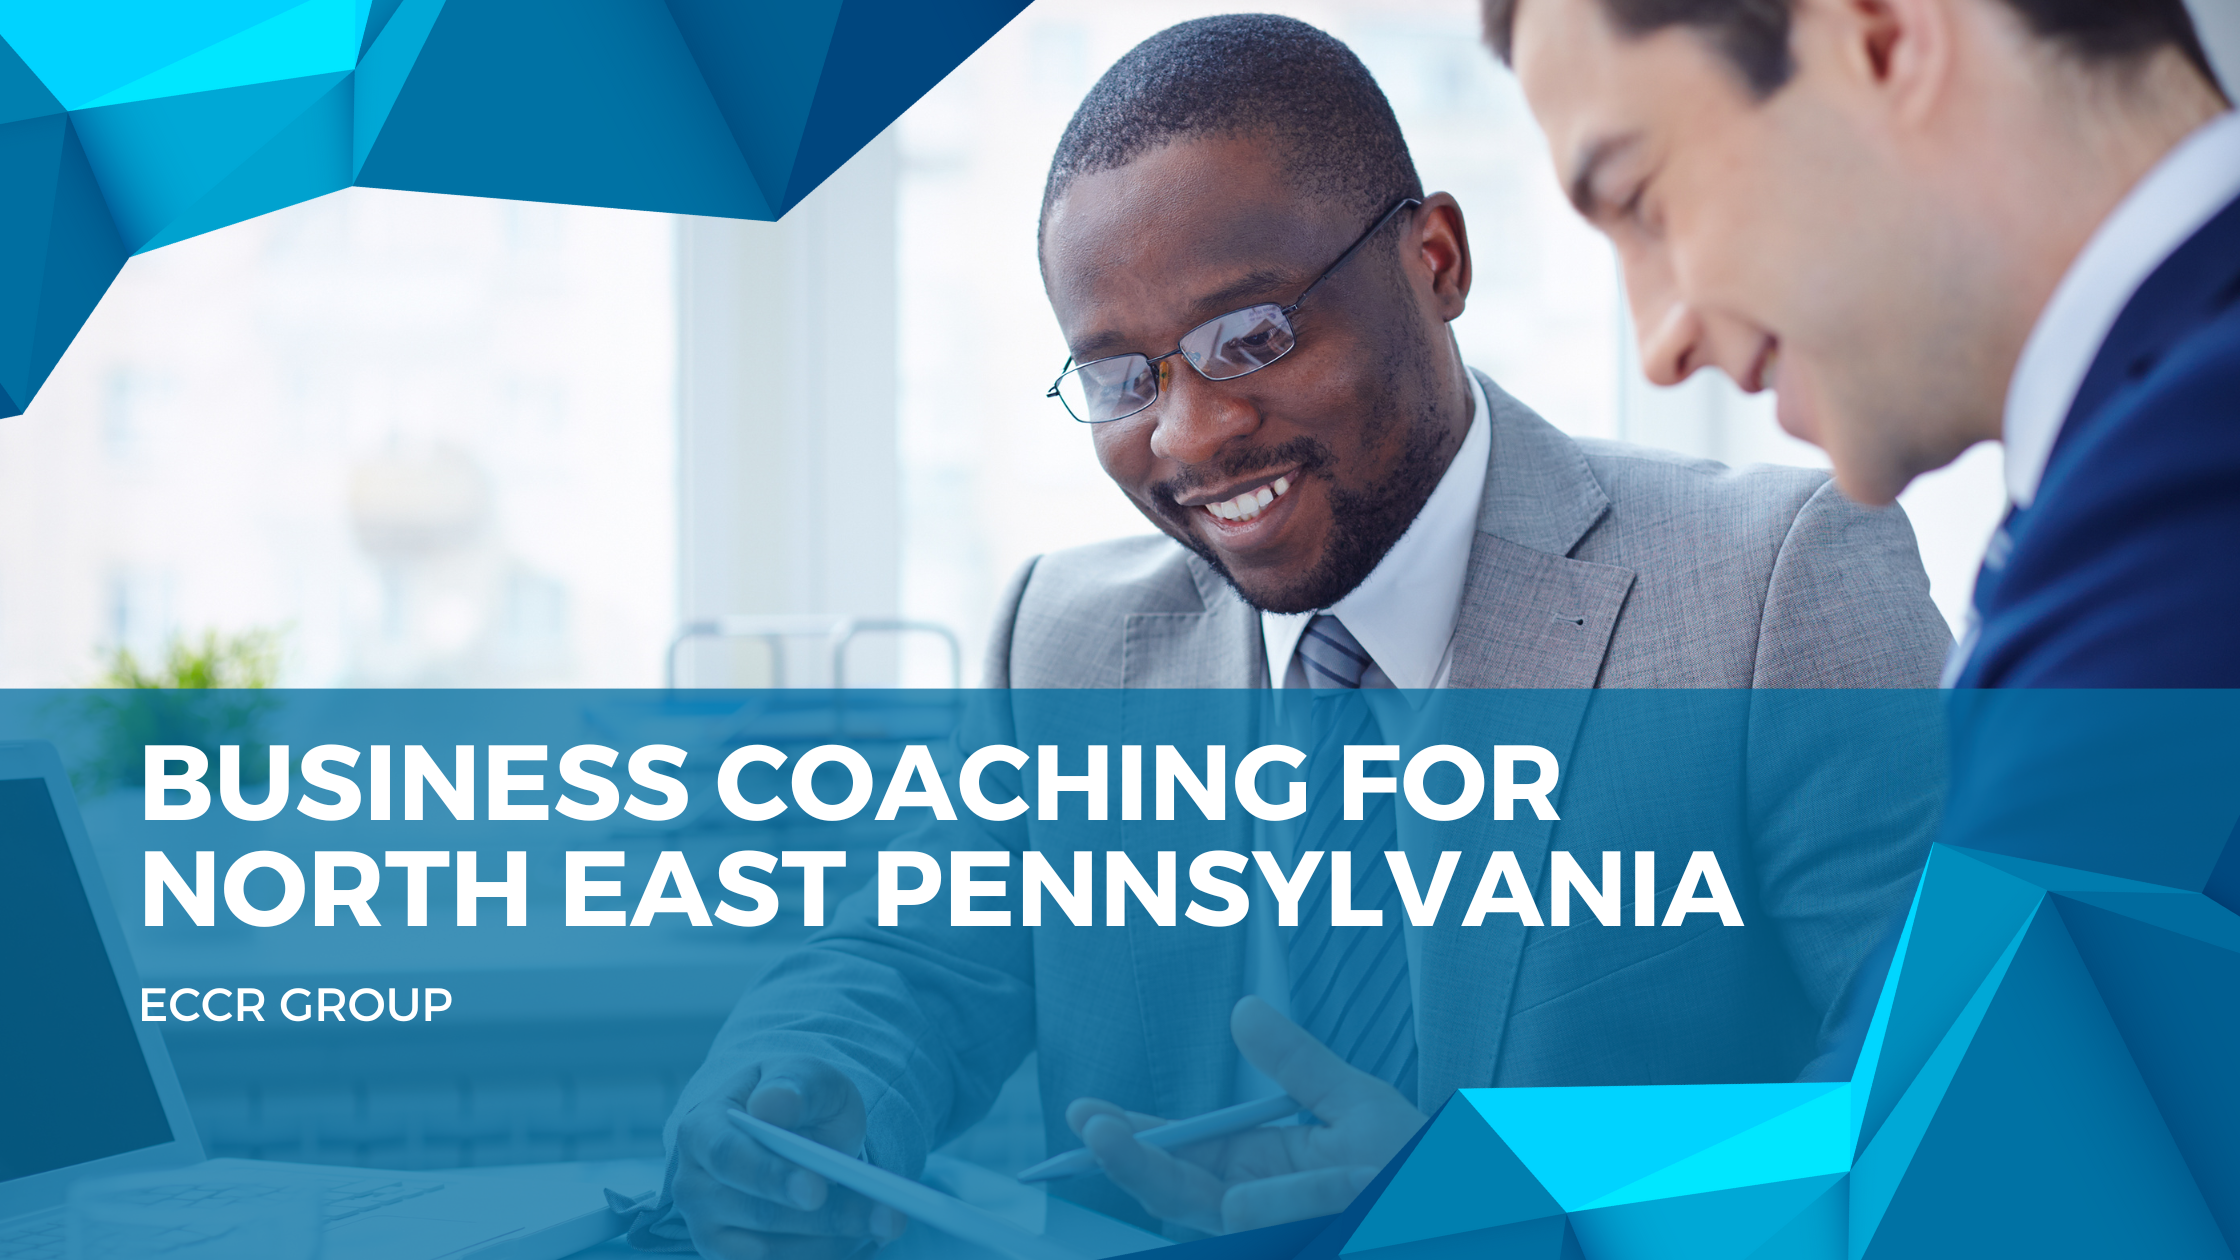 Business Coaching for North East Pennsylvania